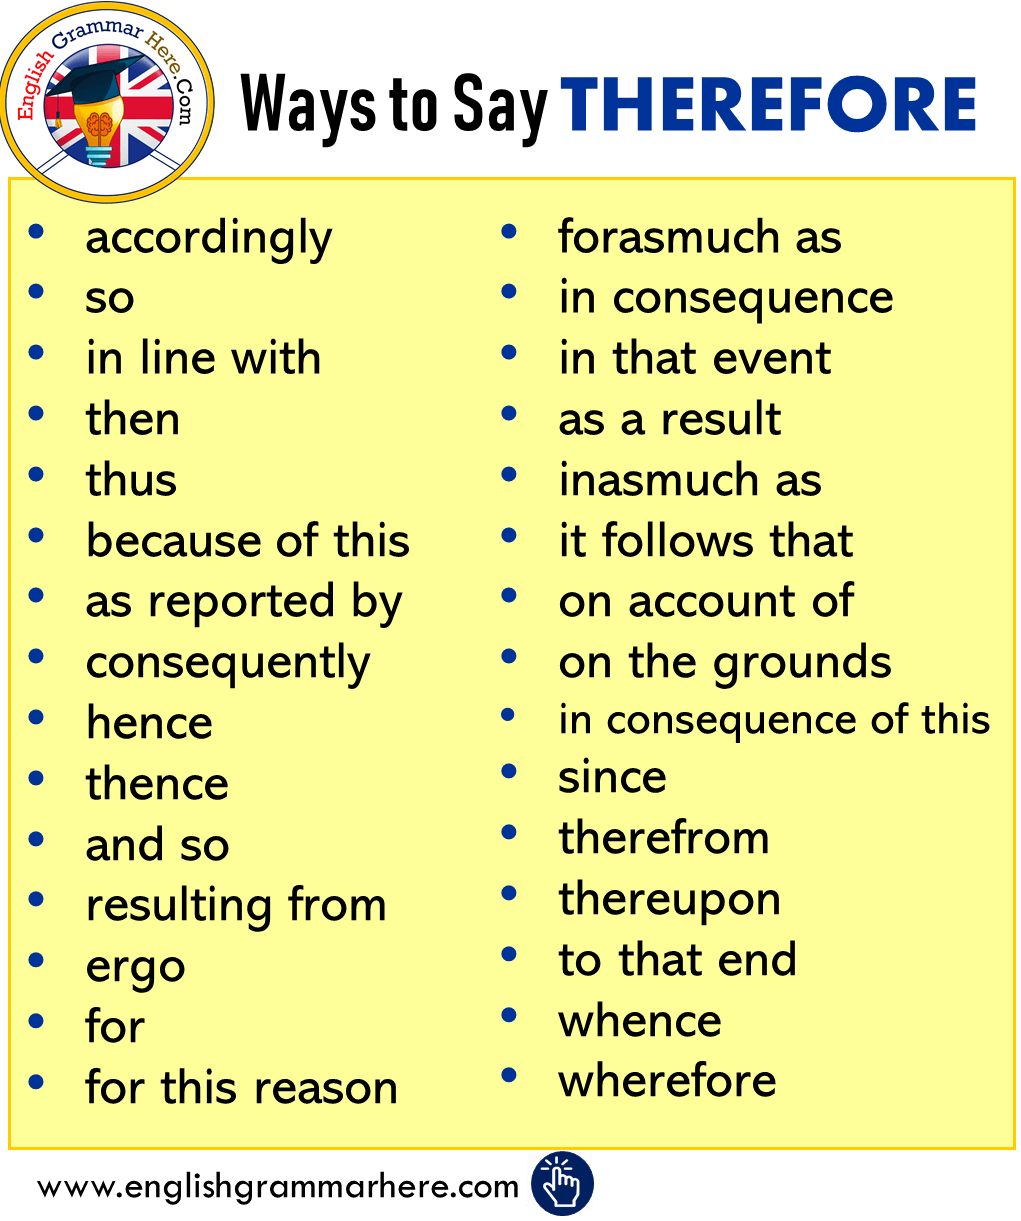 Ways to Say THEREFORE in English